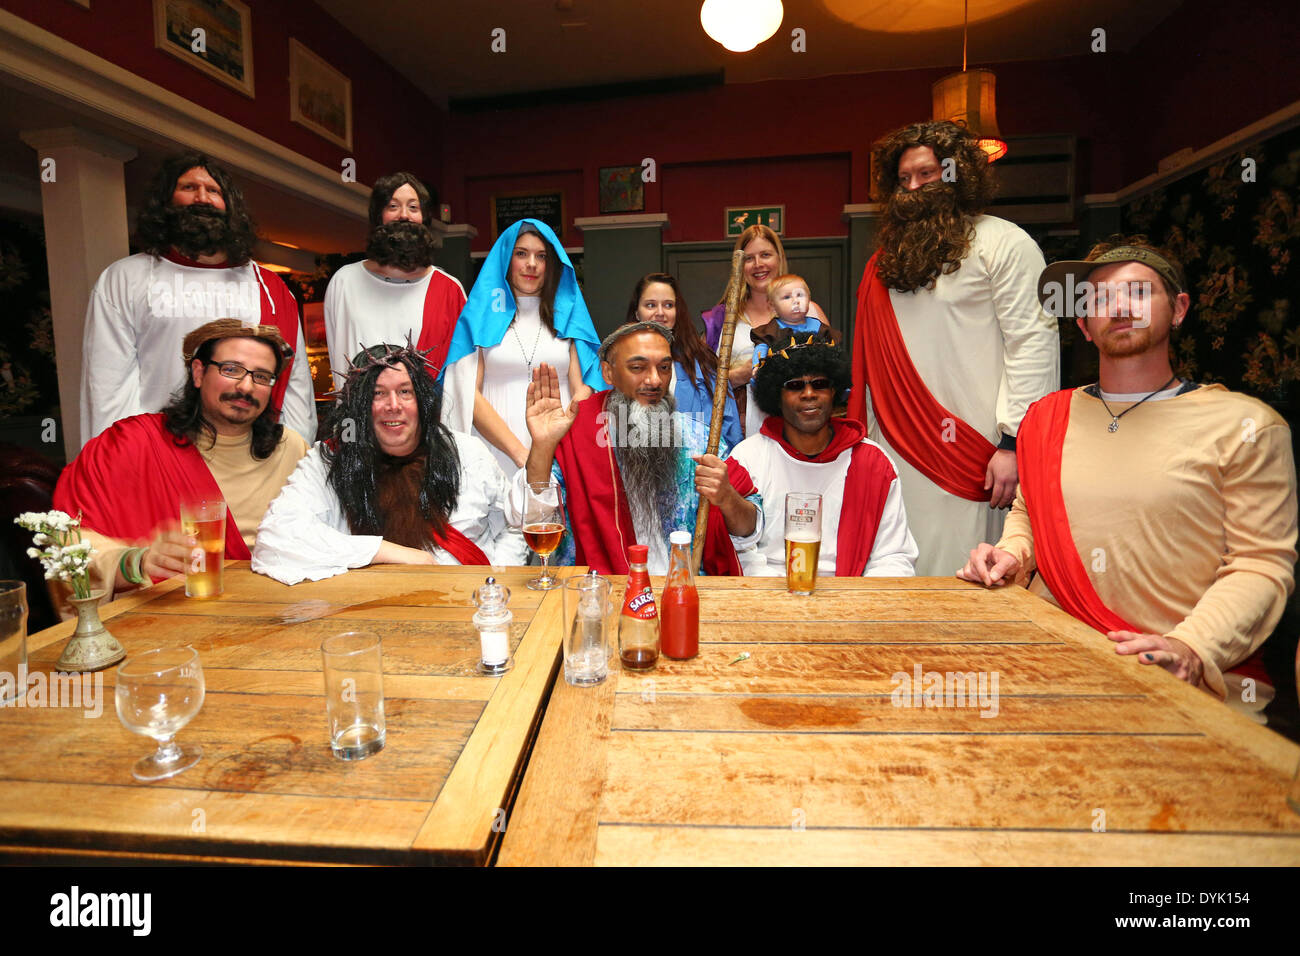 London, UK. 20th April 2014. Participants dressed as Jesus Christ in the annual Easter Sunday Christathon 2014 pub crawl, London, England. The pub crawl moves between London pubs with names associated with biblical themes or characters and started at the Trinity Pub near London Bridge, moving on to the St Christopher Inn before heading into Central London. Credit:  Paul Brown/Alamy Live News Stock Photo